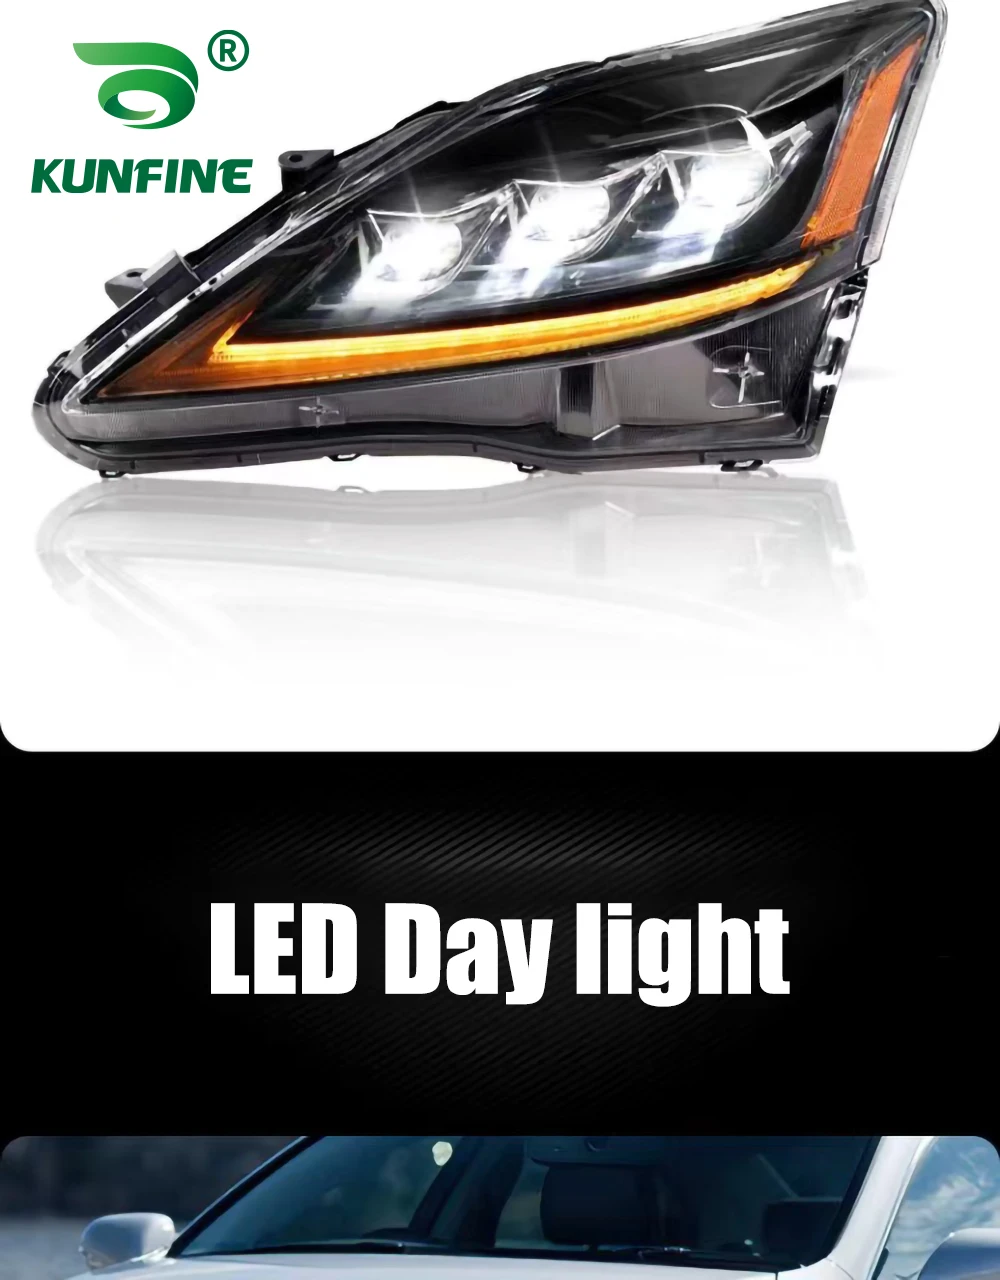 KUNFINE Car Styling Car Headlight Assembly For Toyota Camry 2012 2013 2014  LED Head Lamp Car Tuning Light Parts Plug And Play on sale